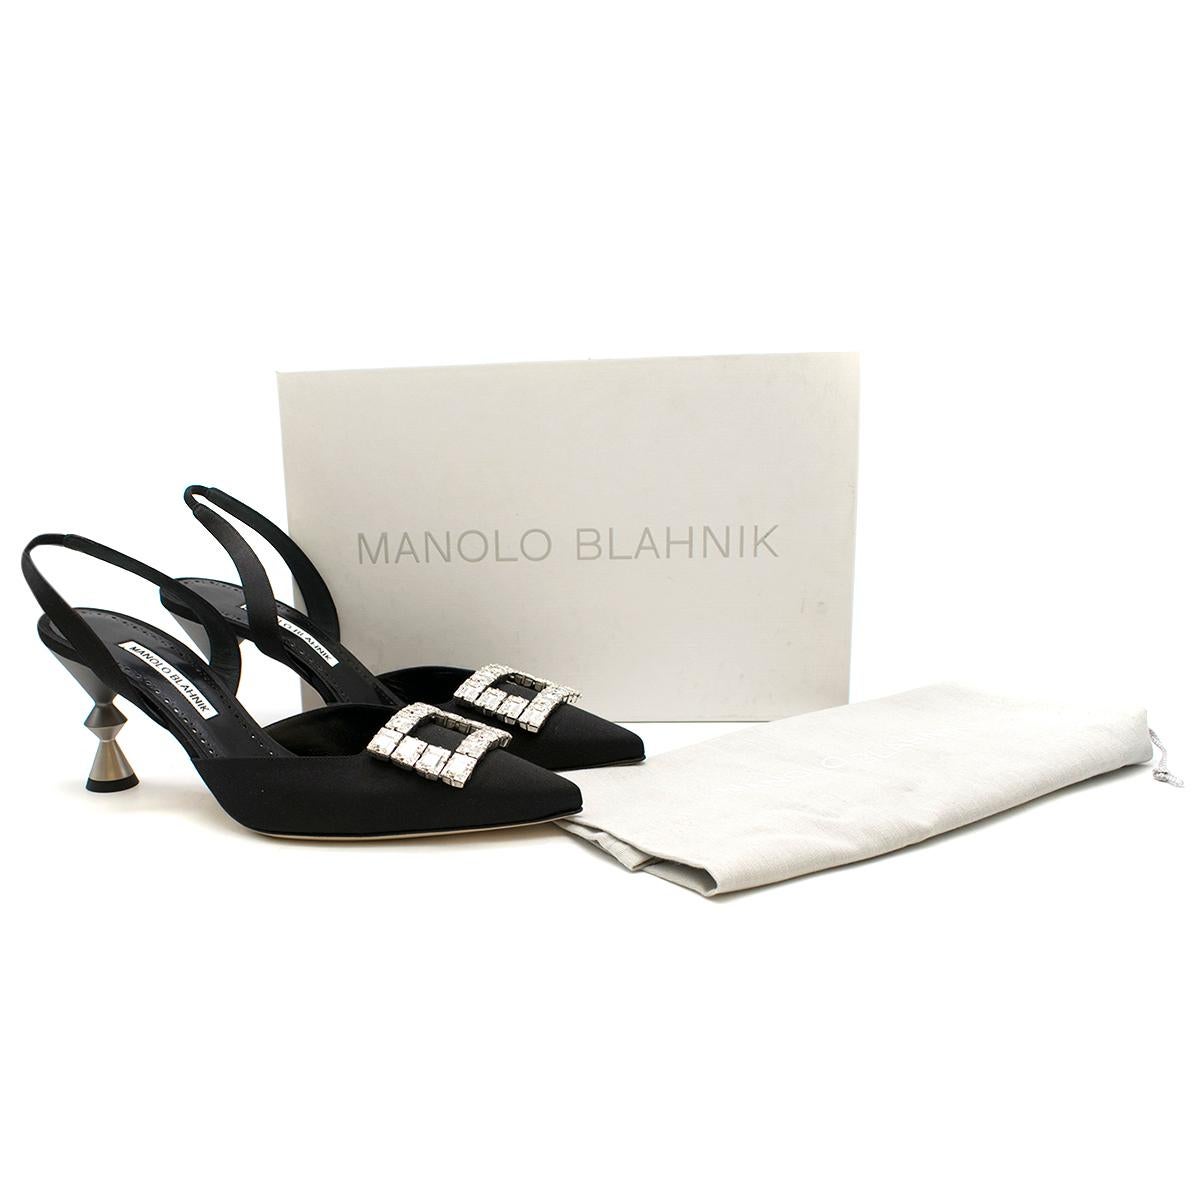 Manolo Blahnik Spuriasli Black Satin Crystal Embellished Pumps

- Spuriasli black satin pumps
- Featuring pointed toe
- Front with crystal embellishment
- Architectural high heel
- Slingback strap 
- Leather insole and sole

This item comes with the